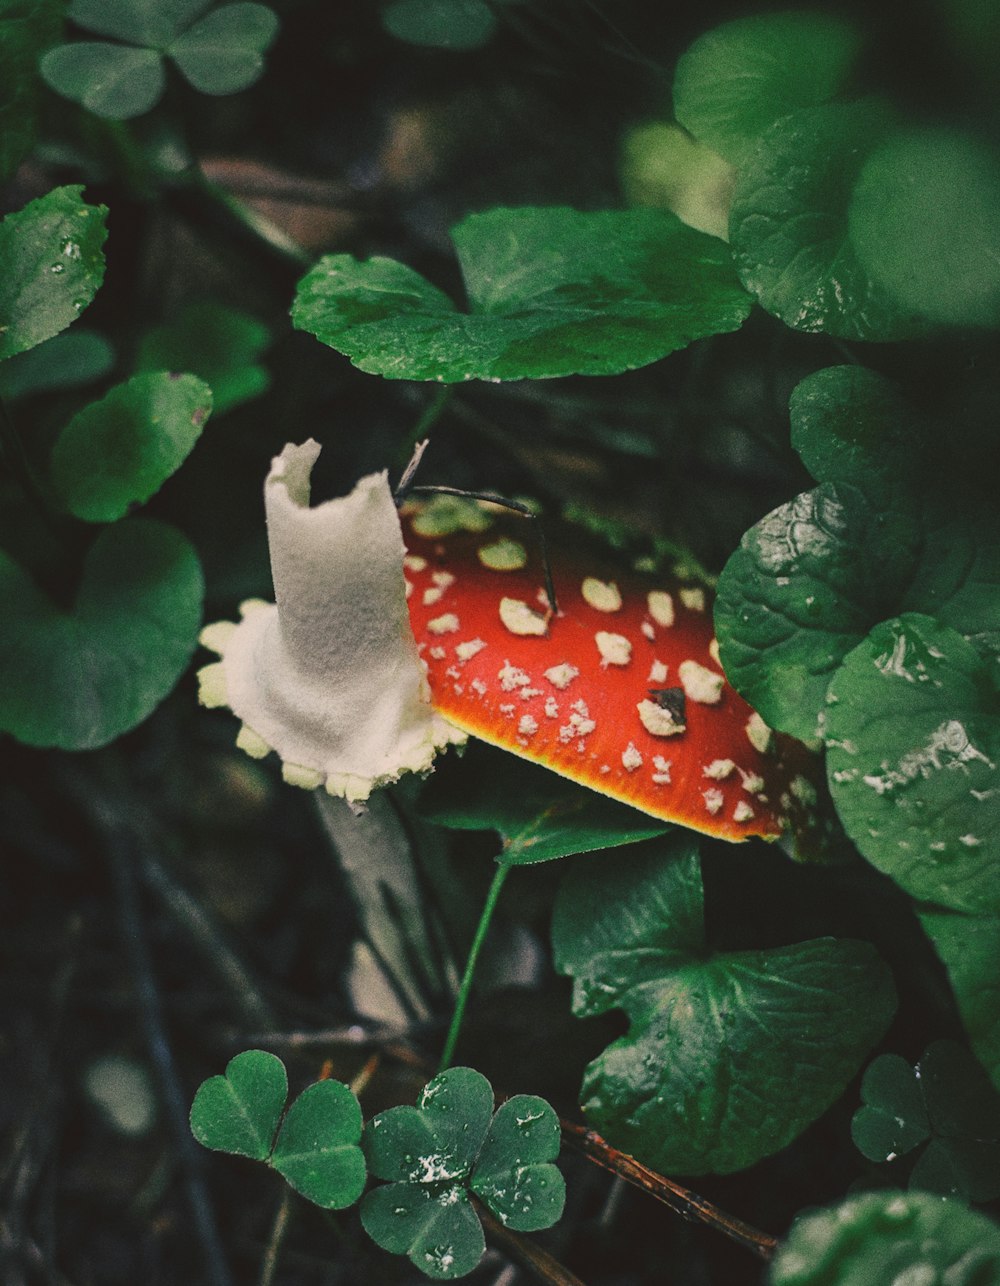 red and white mushroom on green leaves